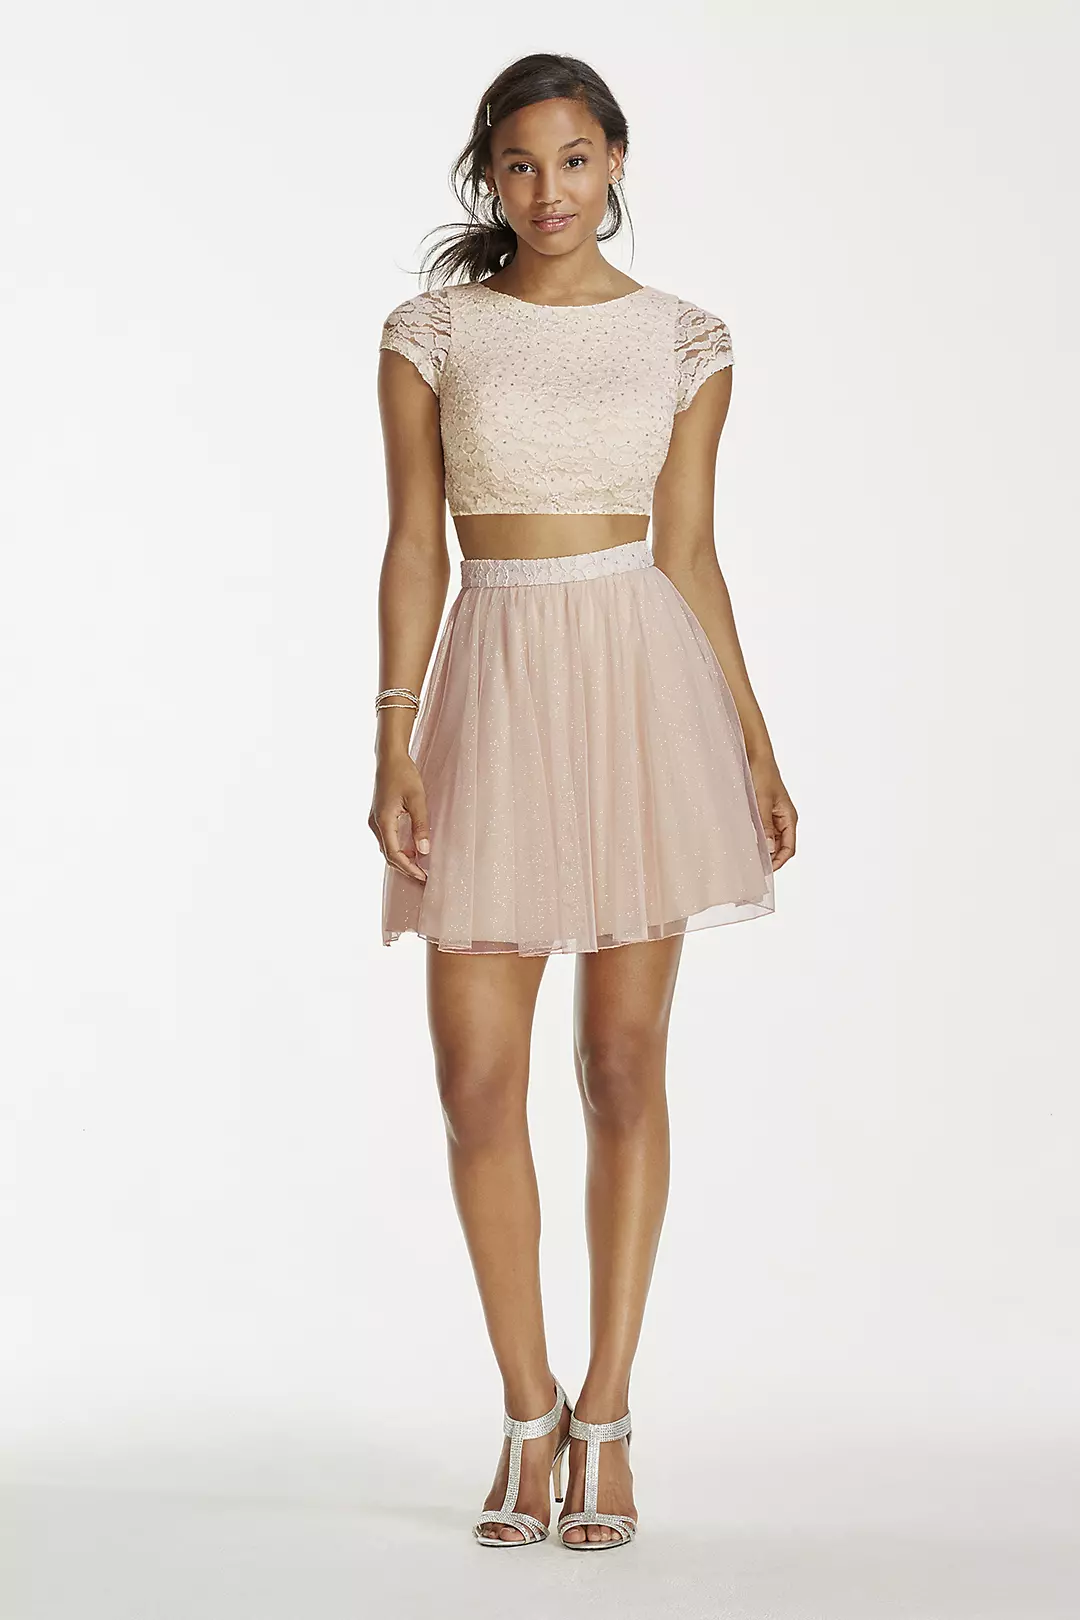 Two Piece Lace Crop Top with Short Mesh Skirt Image